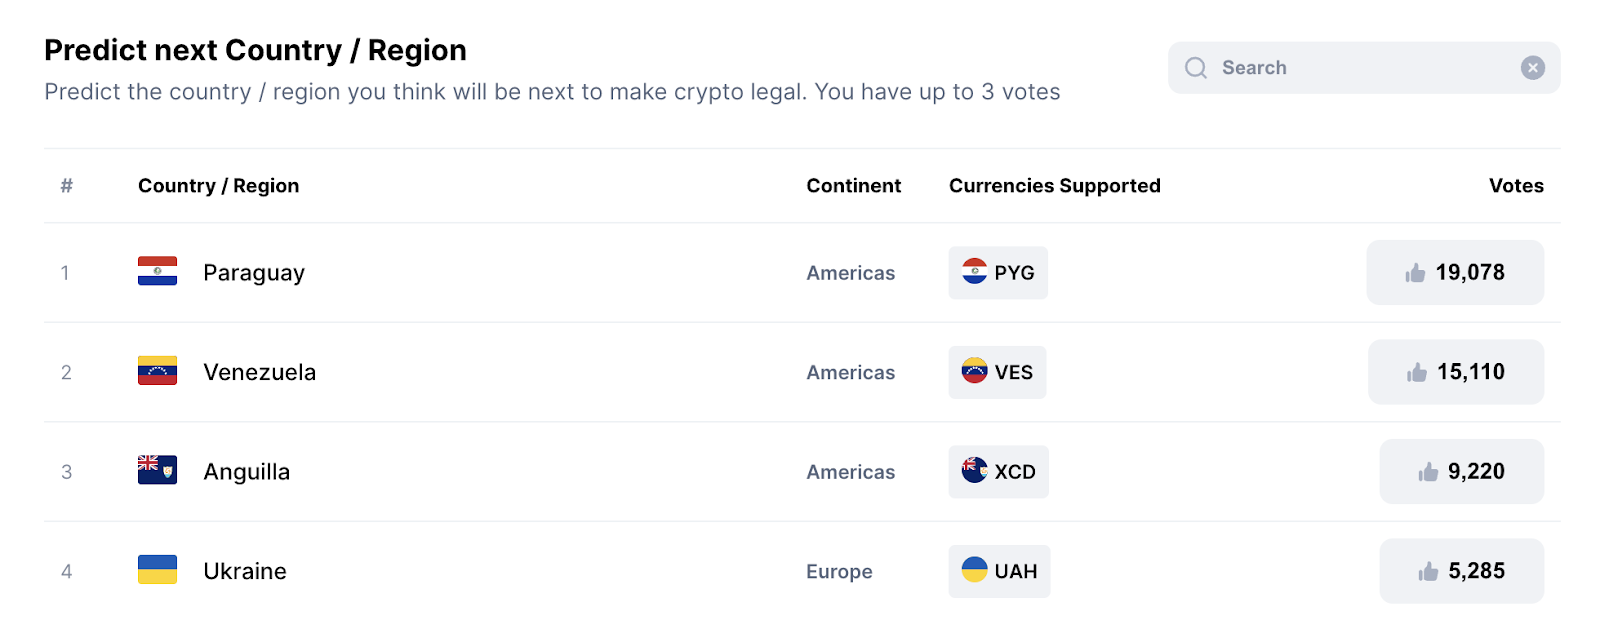 Poll Results: Countries Expected To Legalize Cryptocurrencies